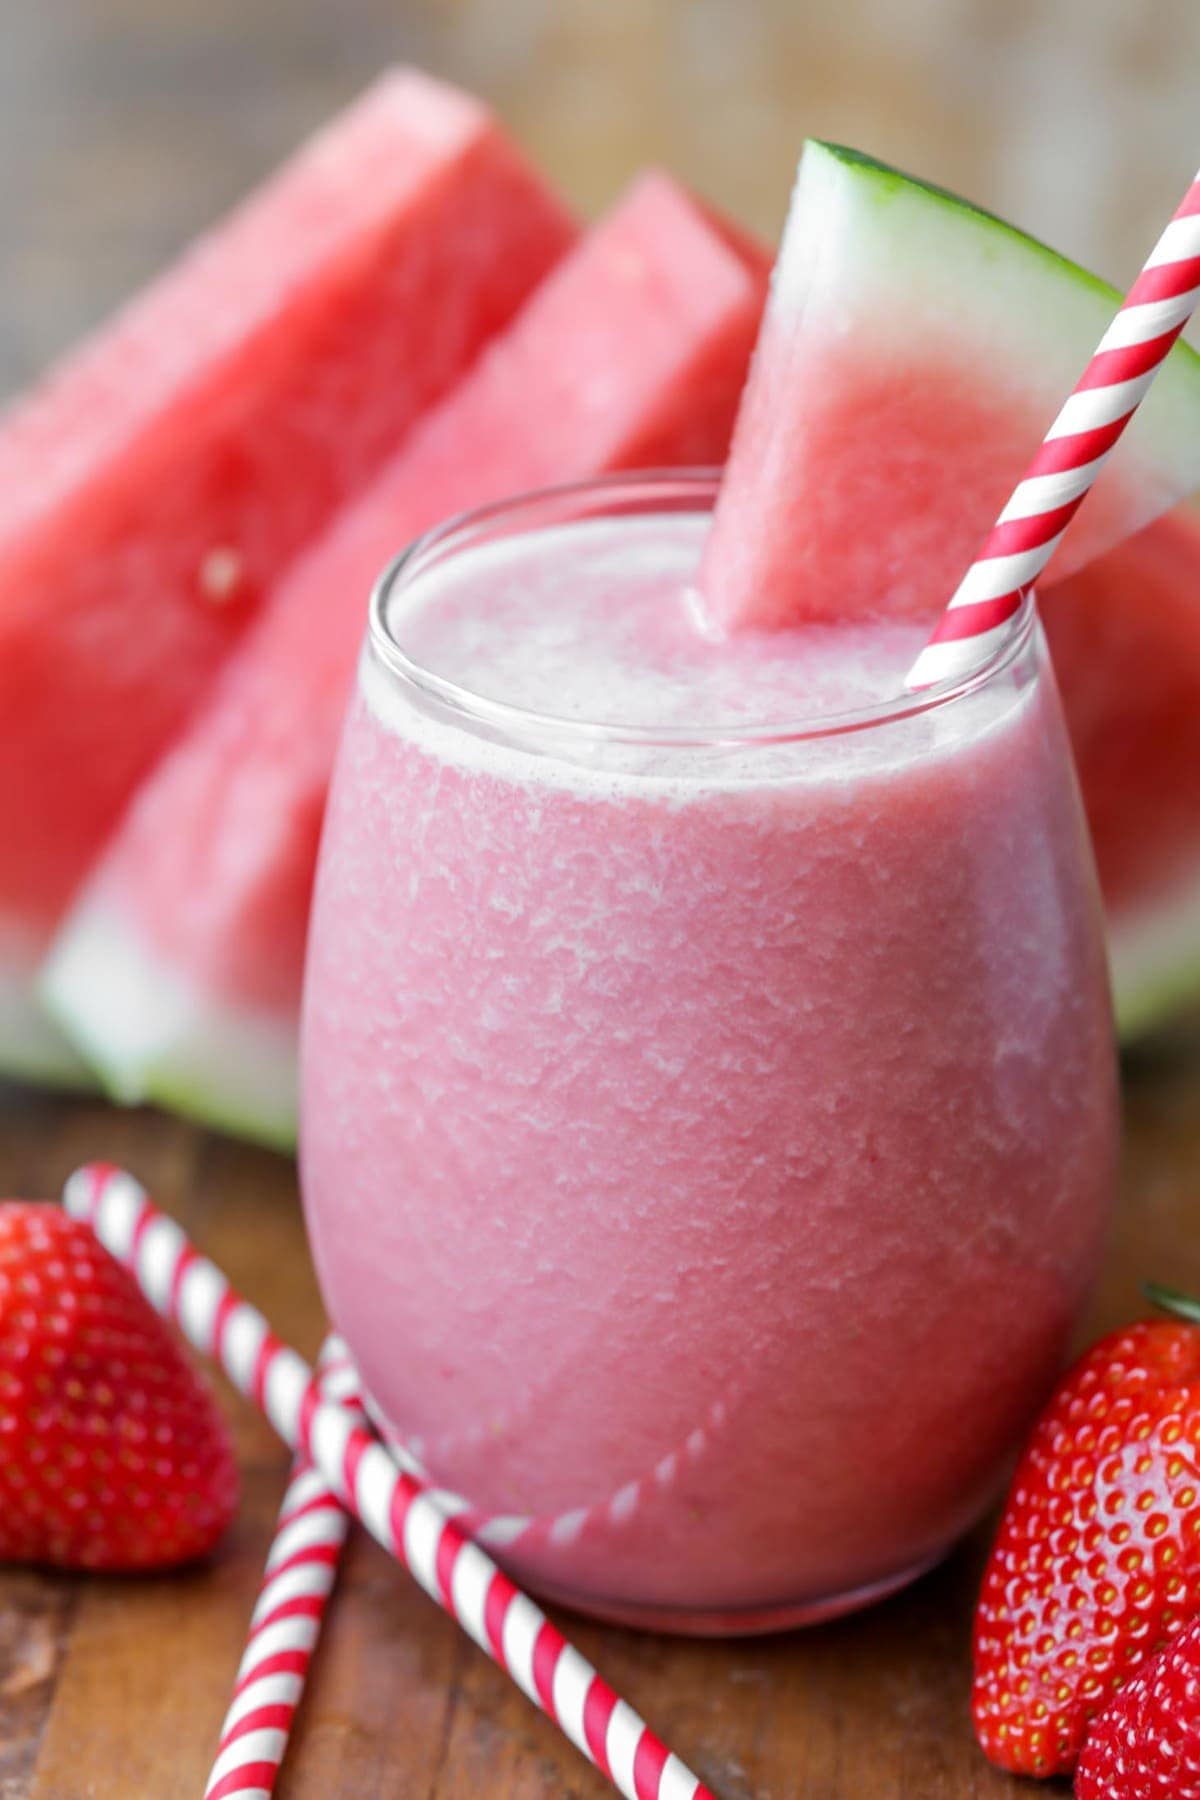 How To Make Watermelon Smoothie? 